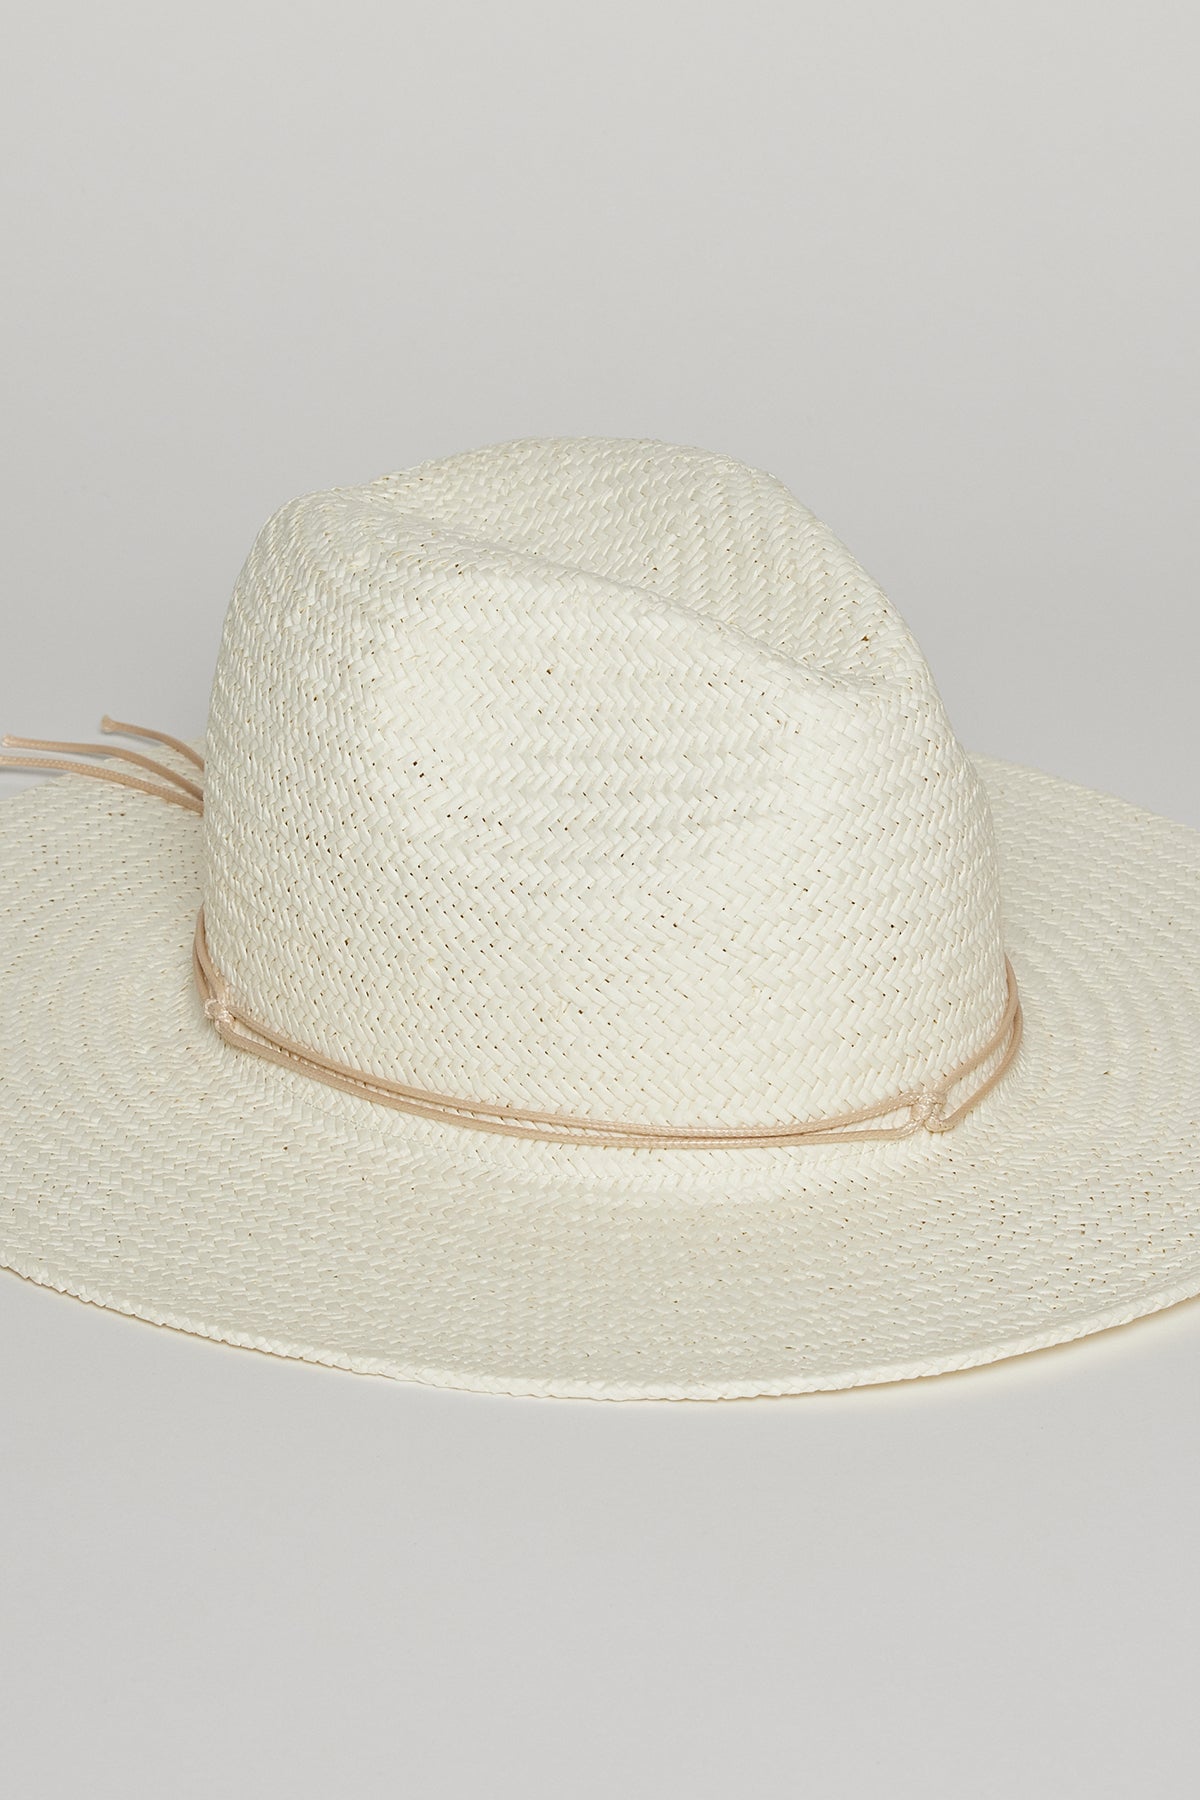 A white straw hat with a wide brim and a beige band around the base of the crown, perfect as a stylish travel hat, displayed on a plain white background. The TRAVELER CONTINENTAL HAT by Velvet by Graham & Spencer.-36290936045761